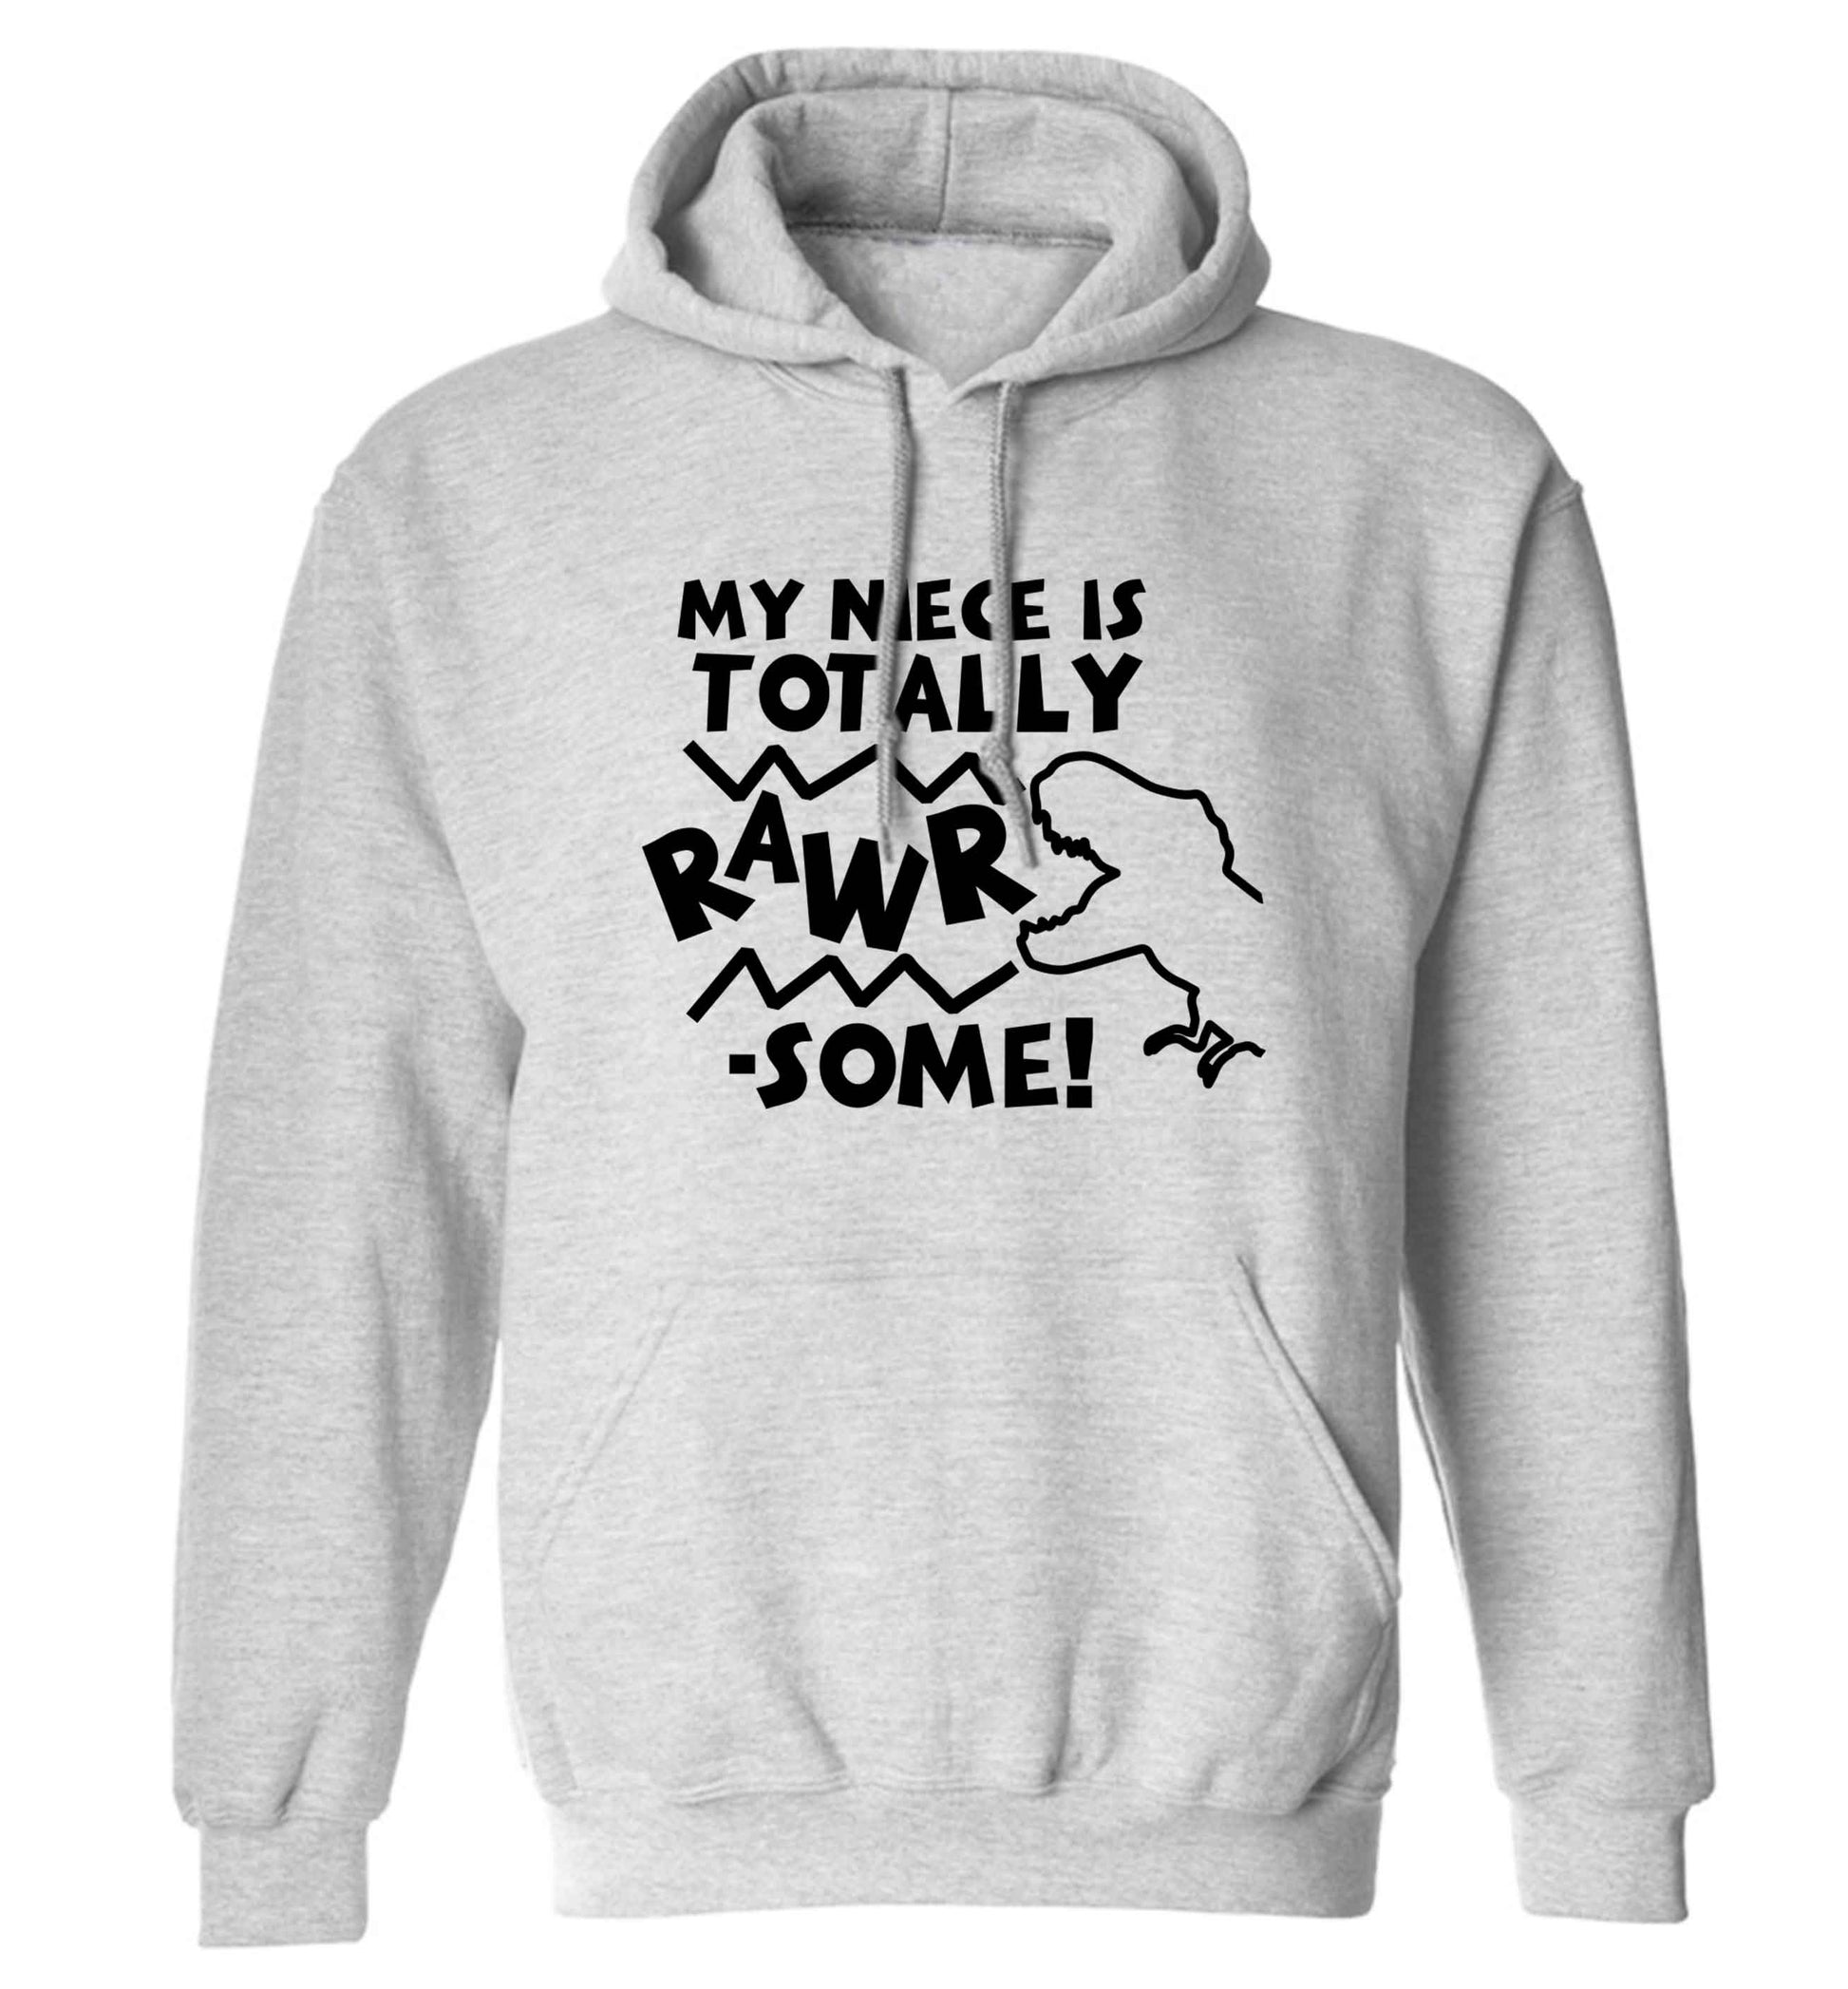 My niece is totally rawrsome adults unisex grey hoodie 2XL